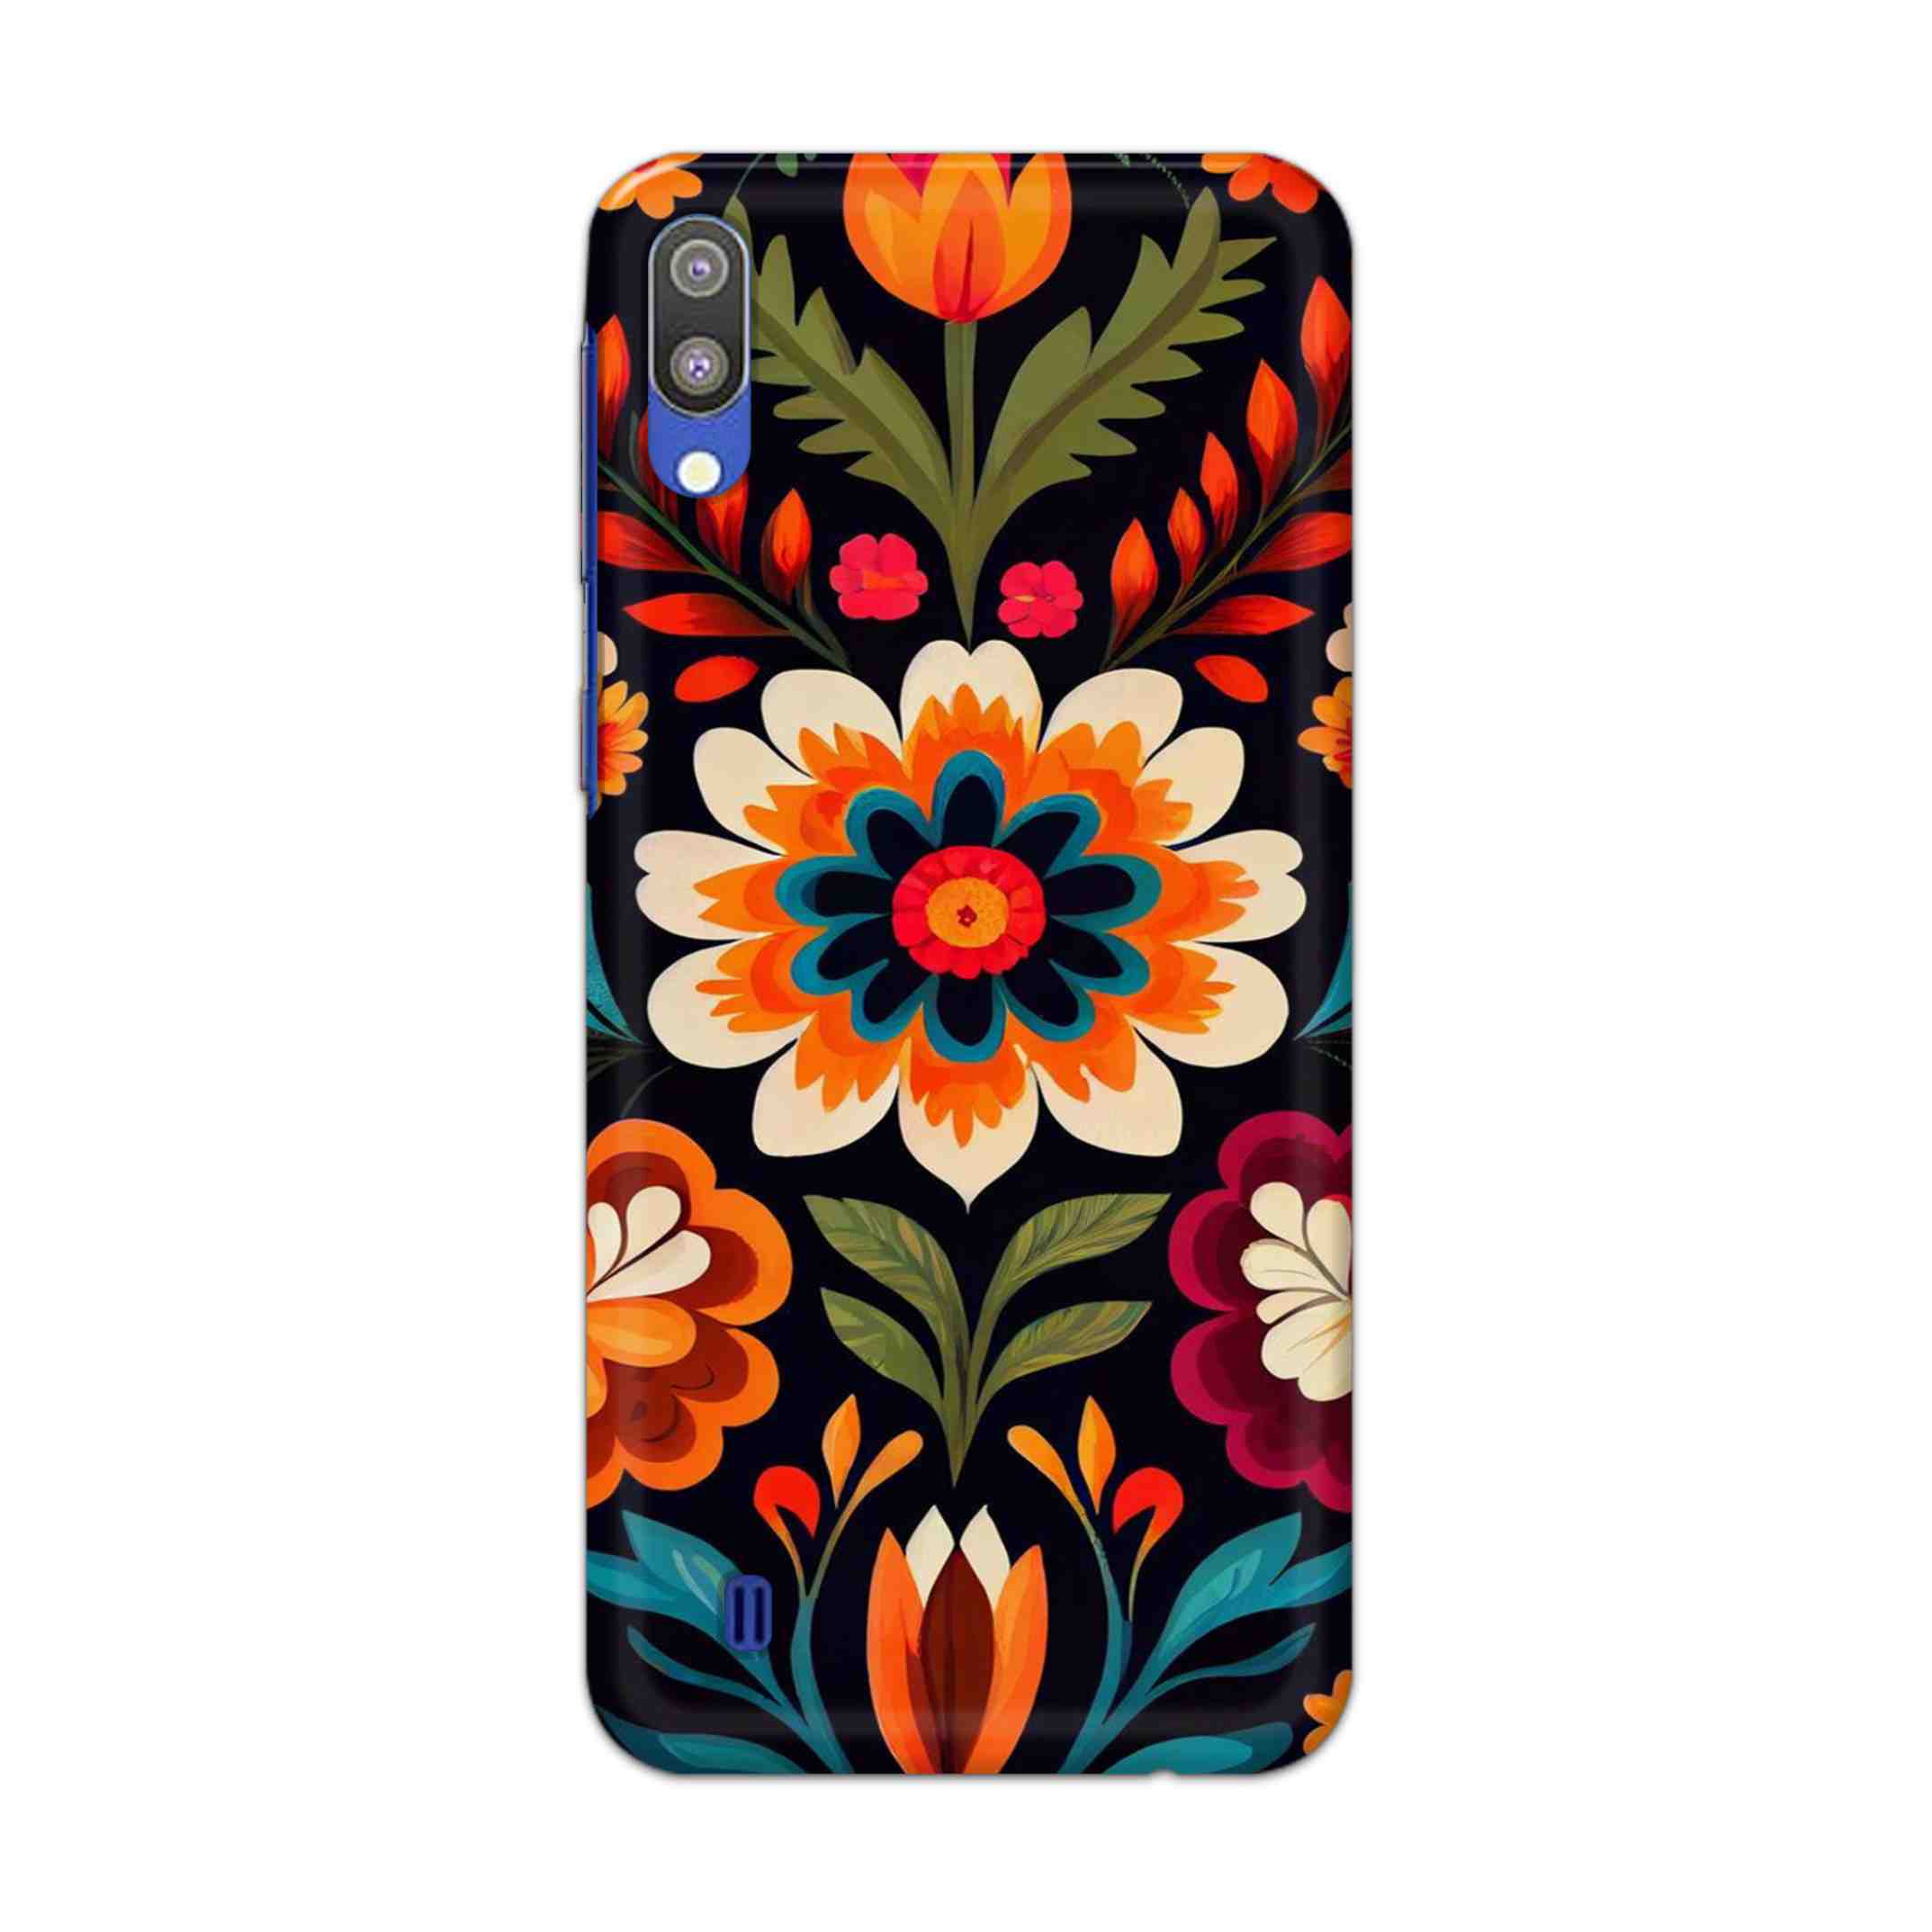 Buy Flower Hard Back Mobile Phone Case Cover For Samsung Galaxy M10 Online